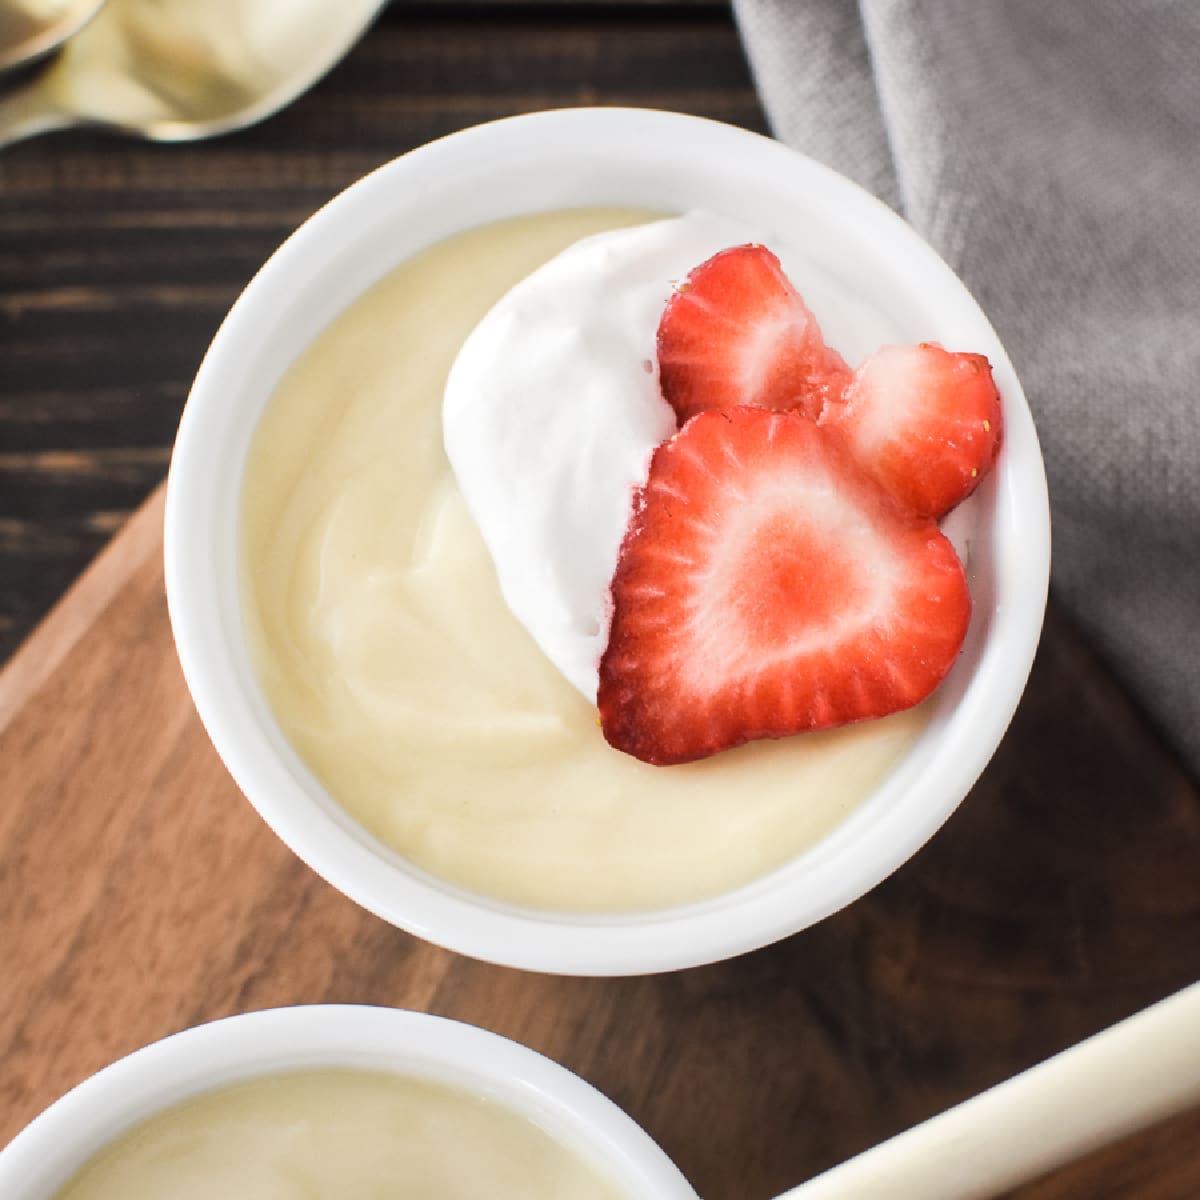 This Dairy-Free Vanilla Pudding recipe is crazy-delicious and takes just minutes to make using ingredients you probably have on hand! Gluten-free, 21 Day Fix approved and Weight Watchers friendly! #glutenfree #dairyfree #21dayfix #weightwatchers #UPF #healthy #healthydessert #kidfriendly #easter #mothersday #cookingwithkids